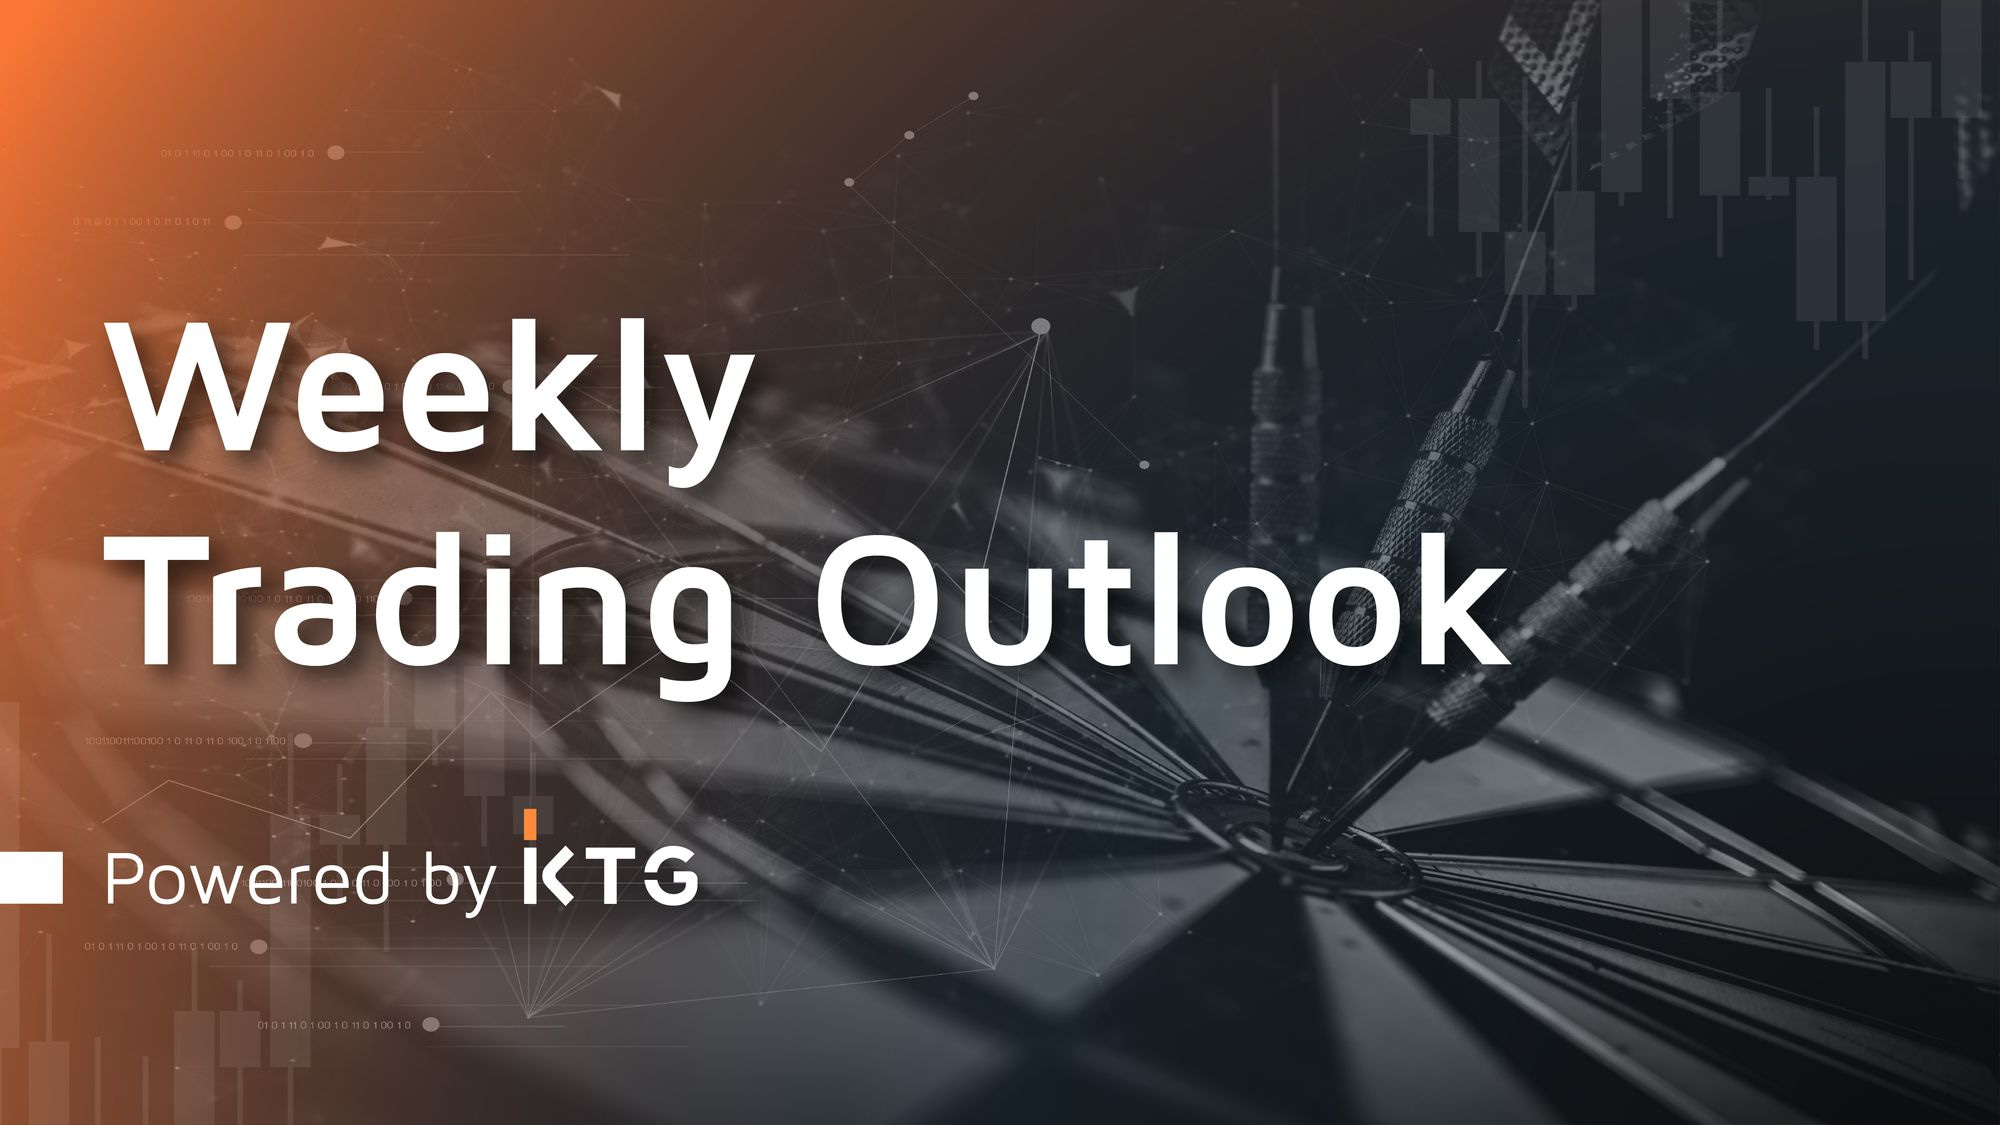 Directional move coming? - #TradingOutlook Powered by KTG